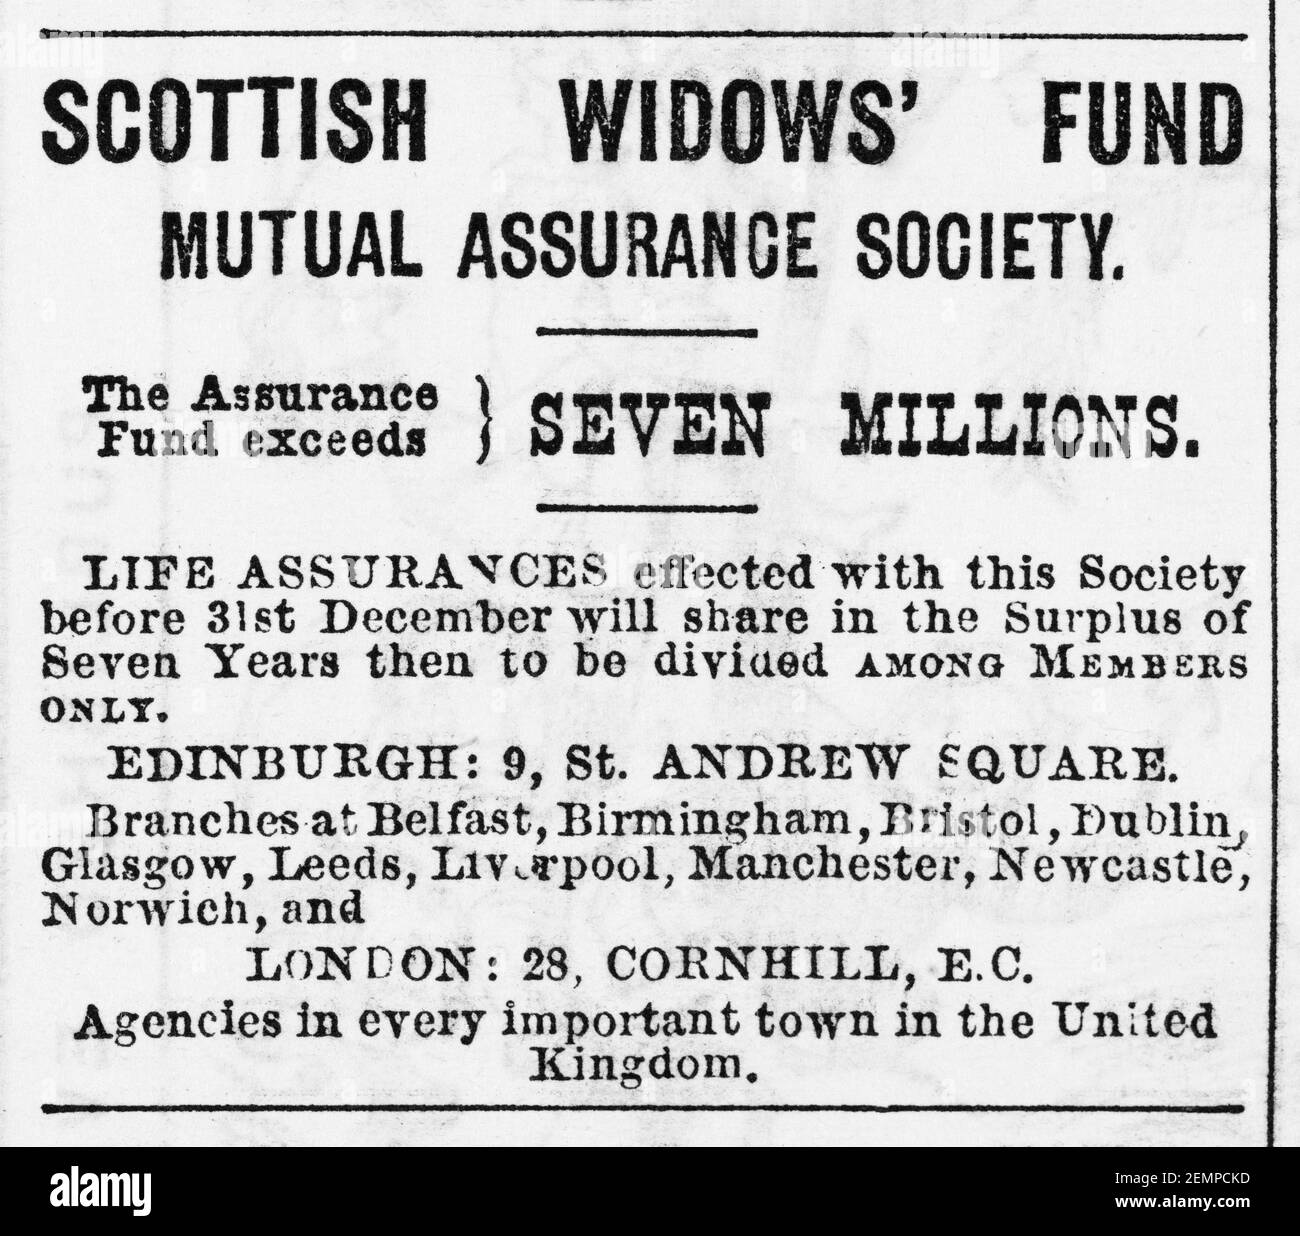 Old Victorian magazine newsprint Scottish Widows financial advert from 1880 - before the dawn of advertising standards. Financial advertising history. Stock Photo